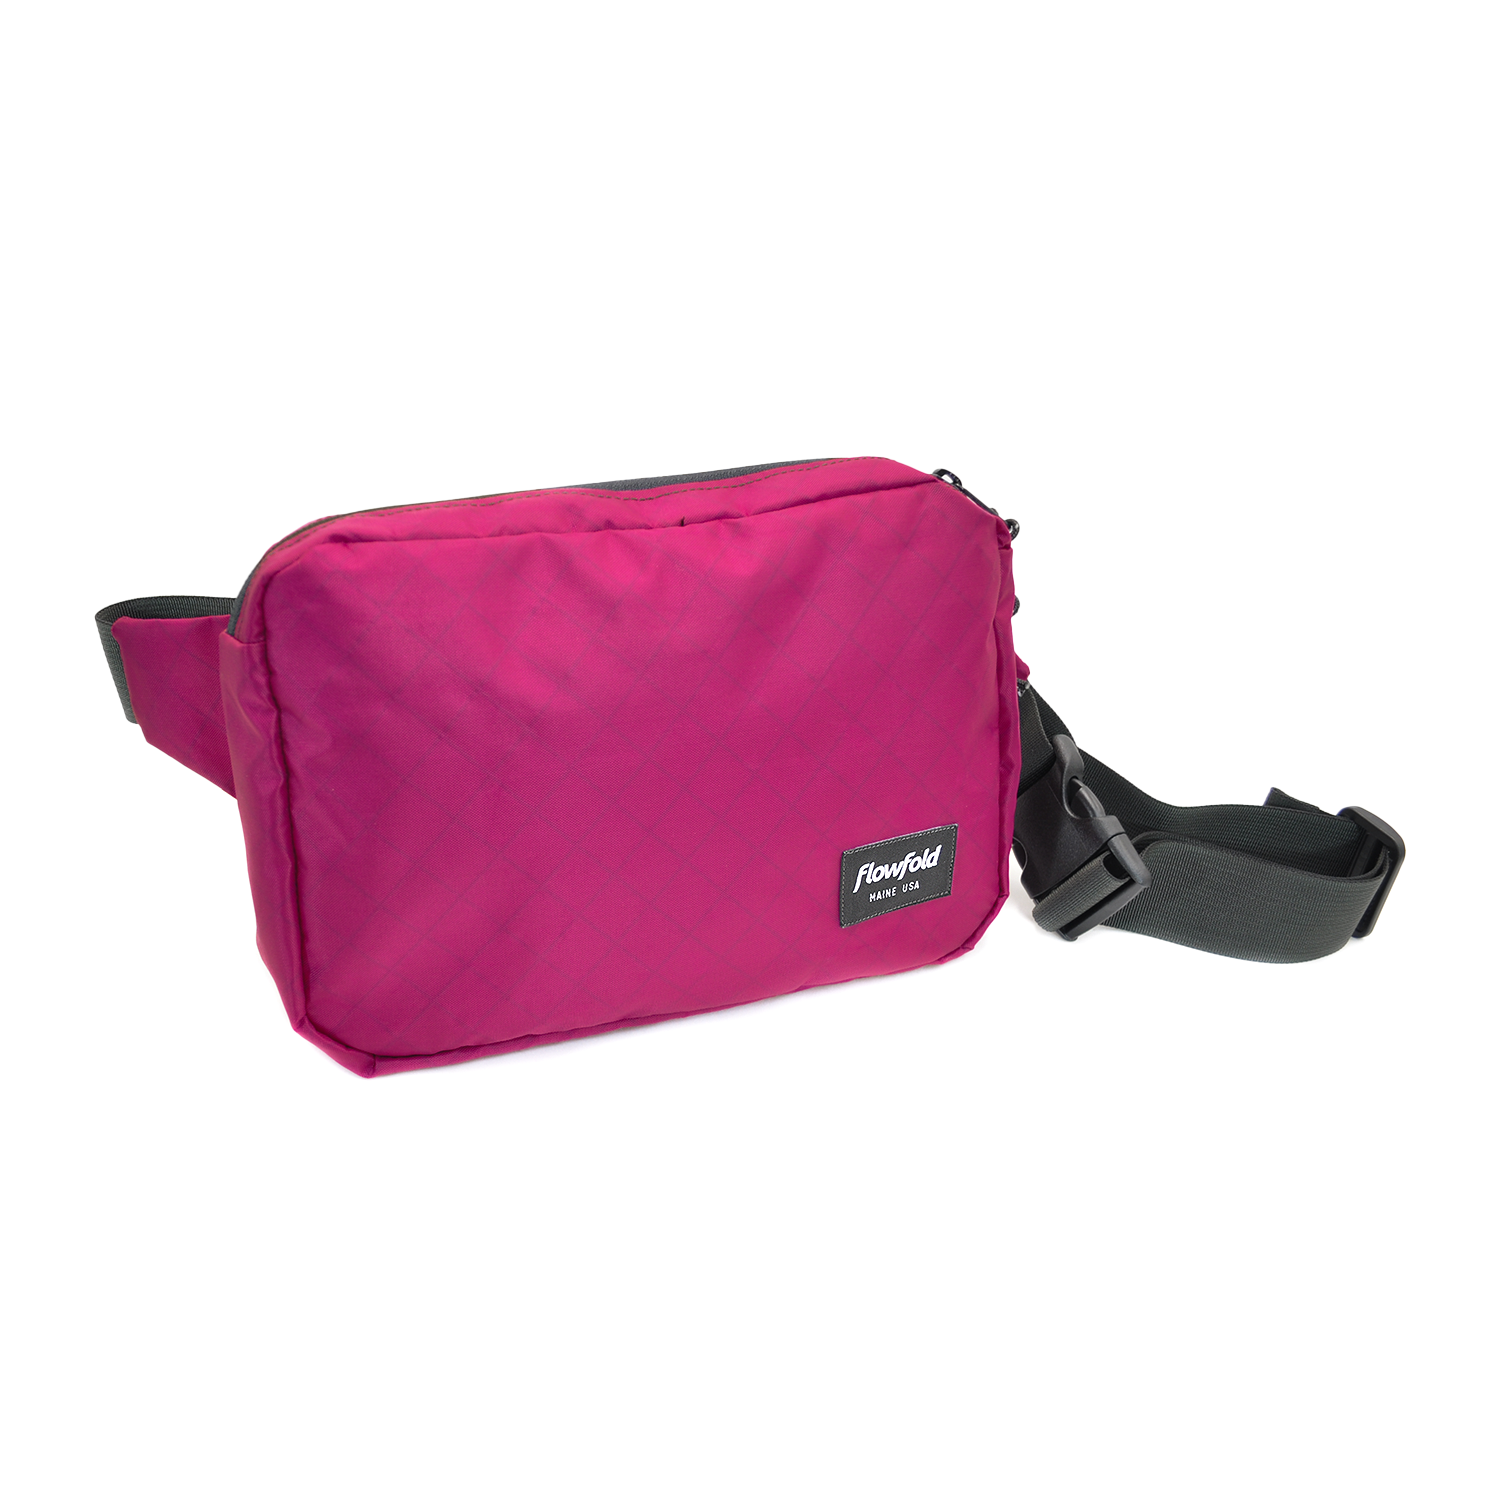 Flowfold Large Explorer Fanny Pack - Recycled Magenta